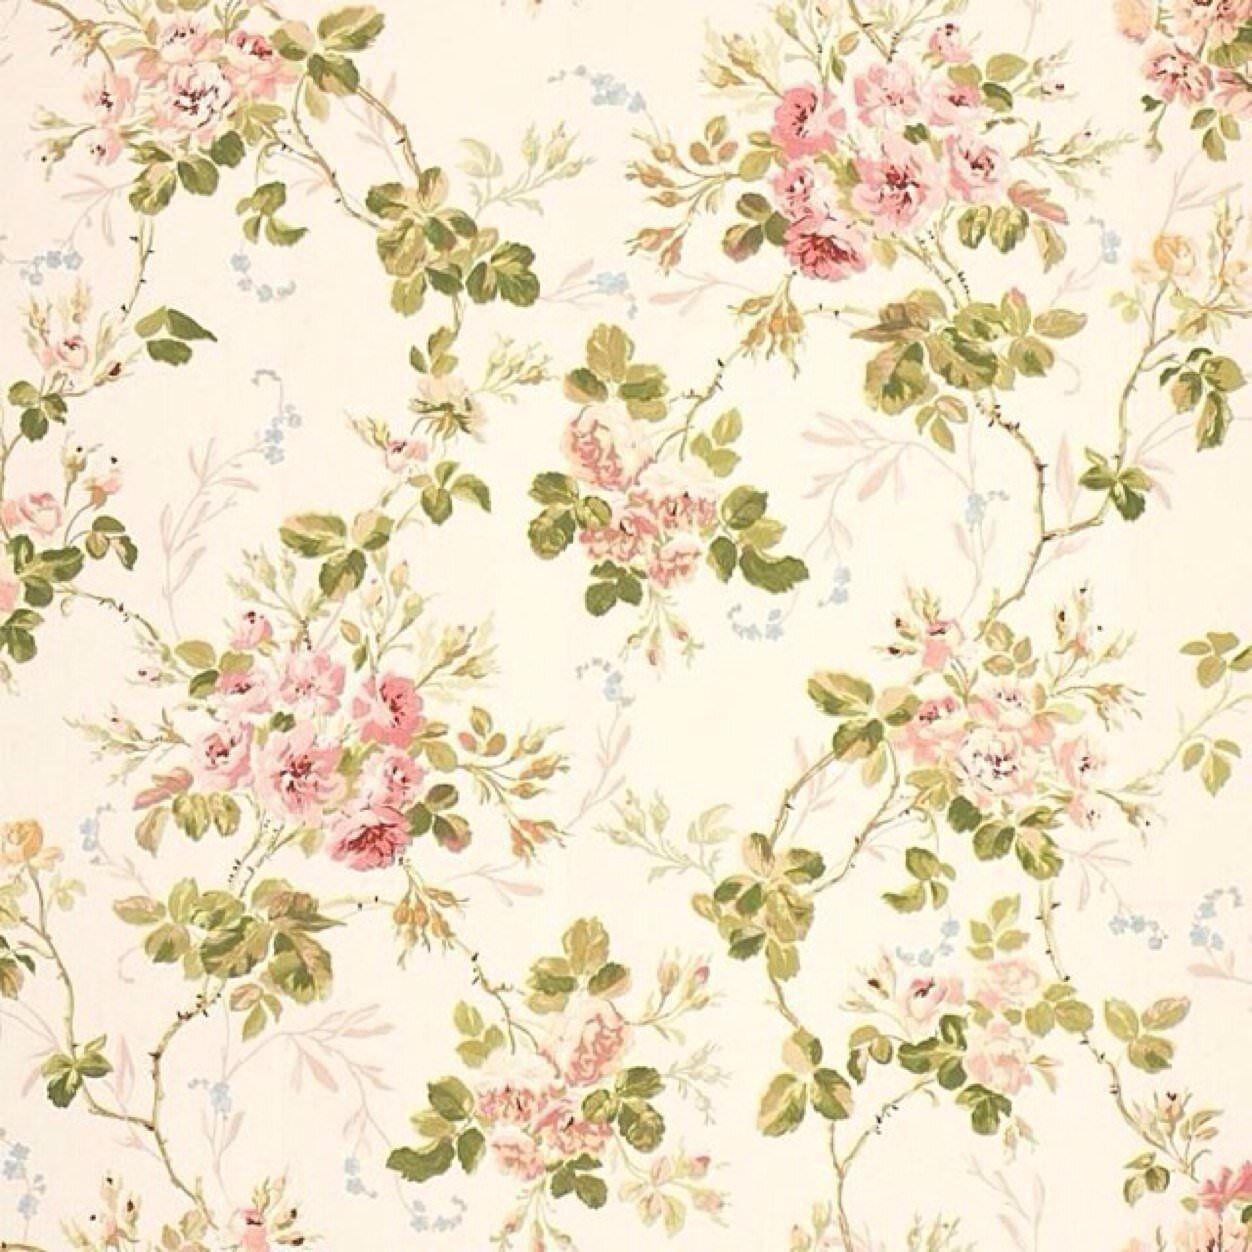 1980s Floral Wallpapers - Top Free ...